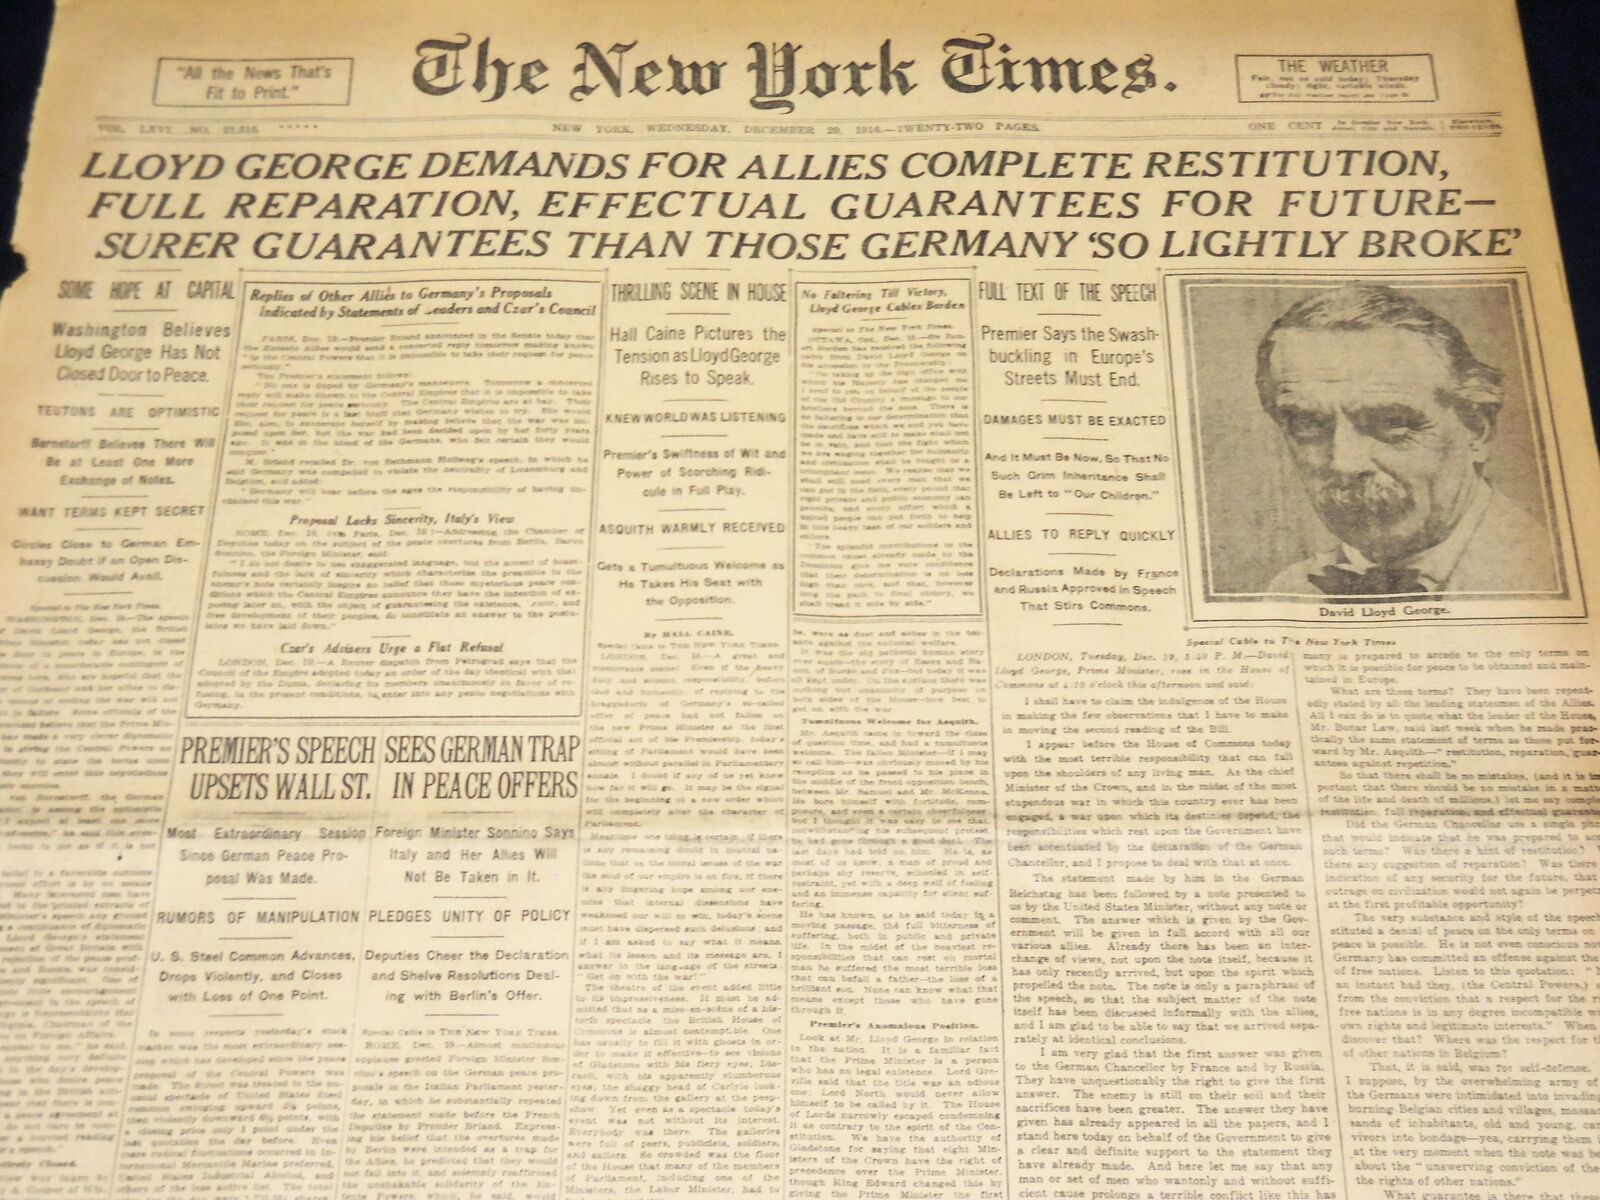 1916 DEC 16 NEW YORK TIMES - LLOYD GEORGE DEMANDS COMPLETE RESTITUTION - NT 8651